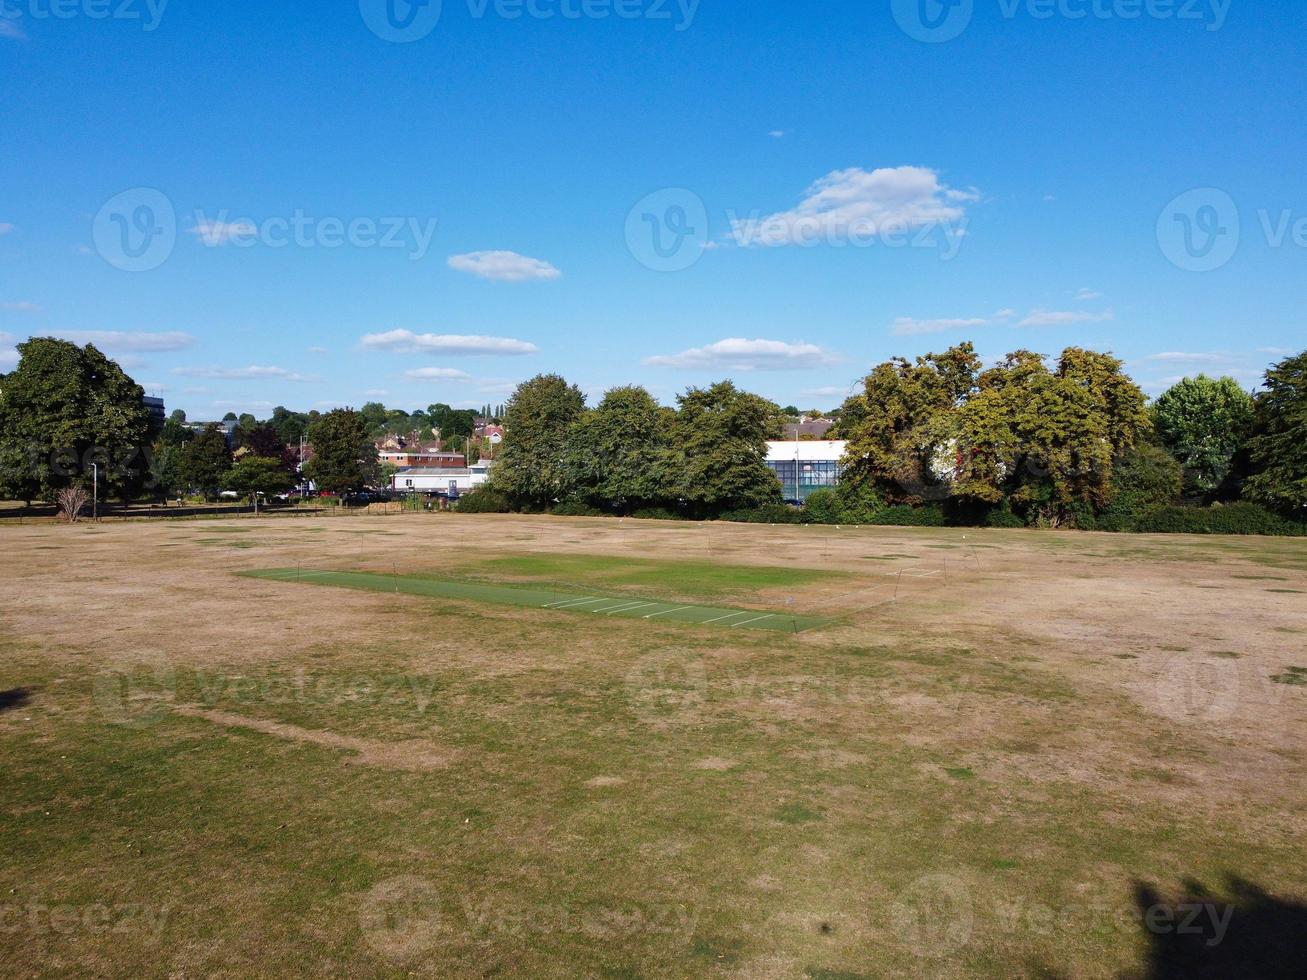 Aerial View of Cricket Ground at Local Public Park of Hemel Hempstead England Great Britain photo